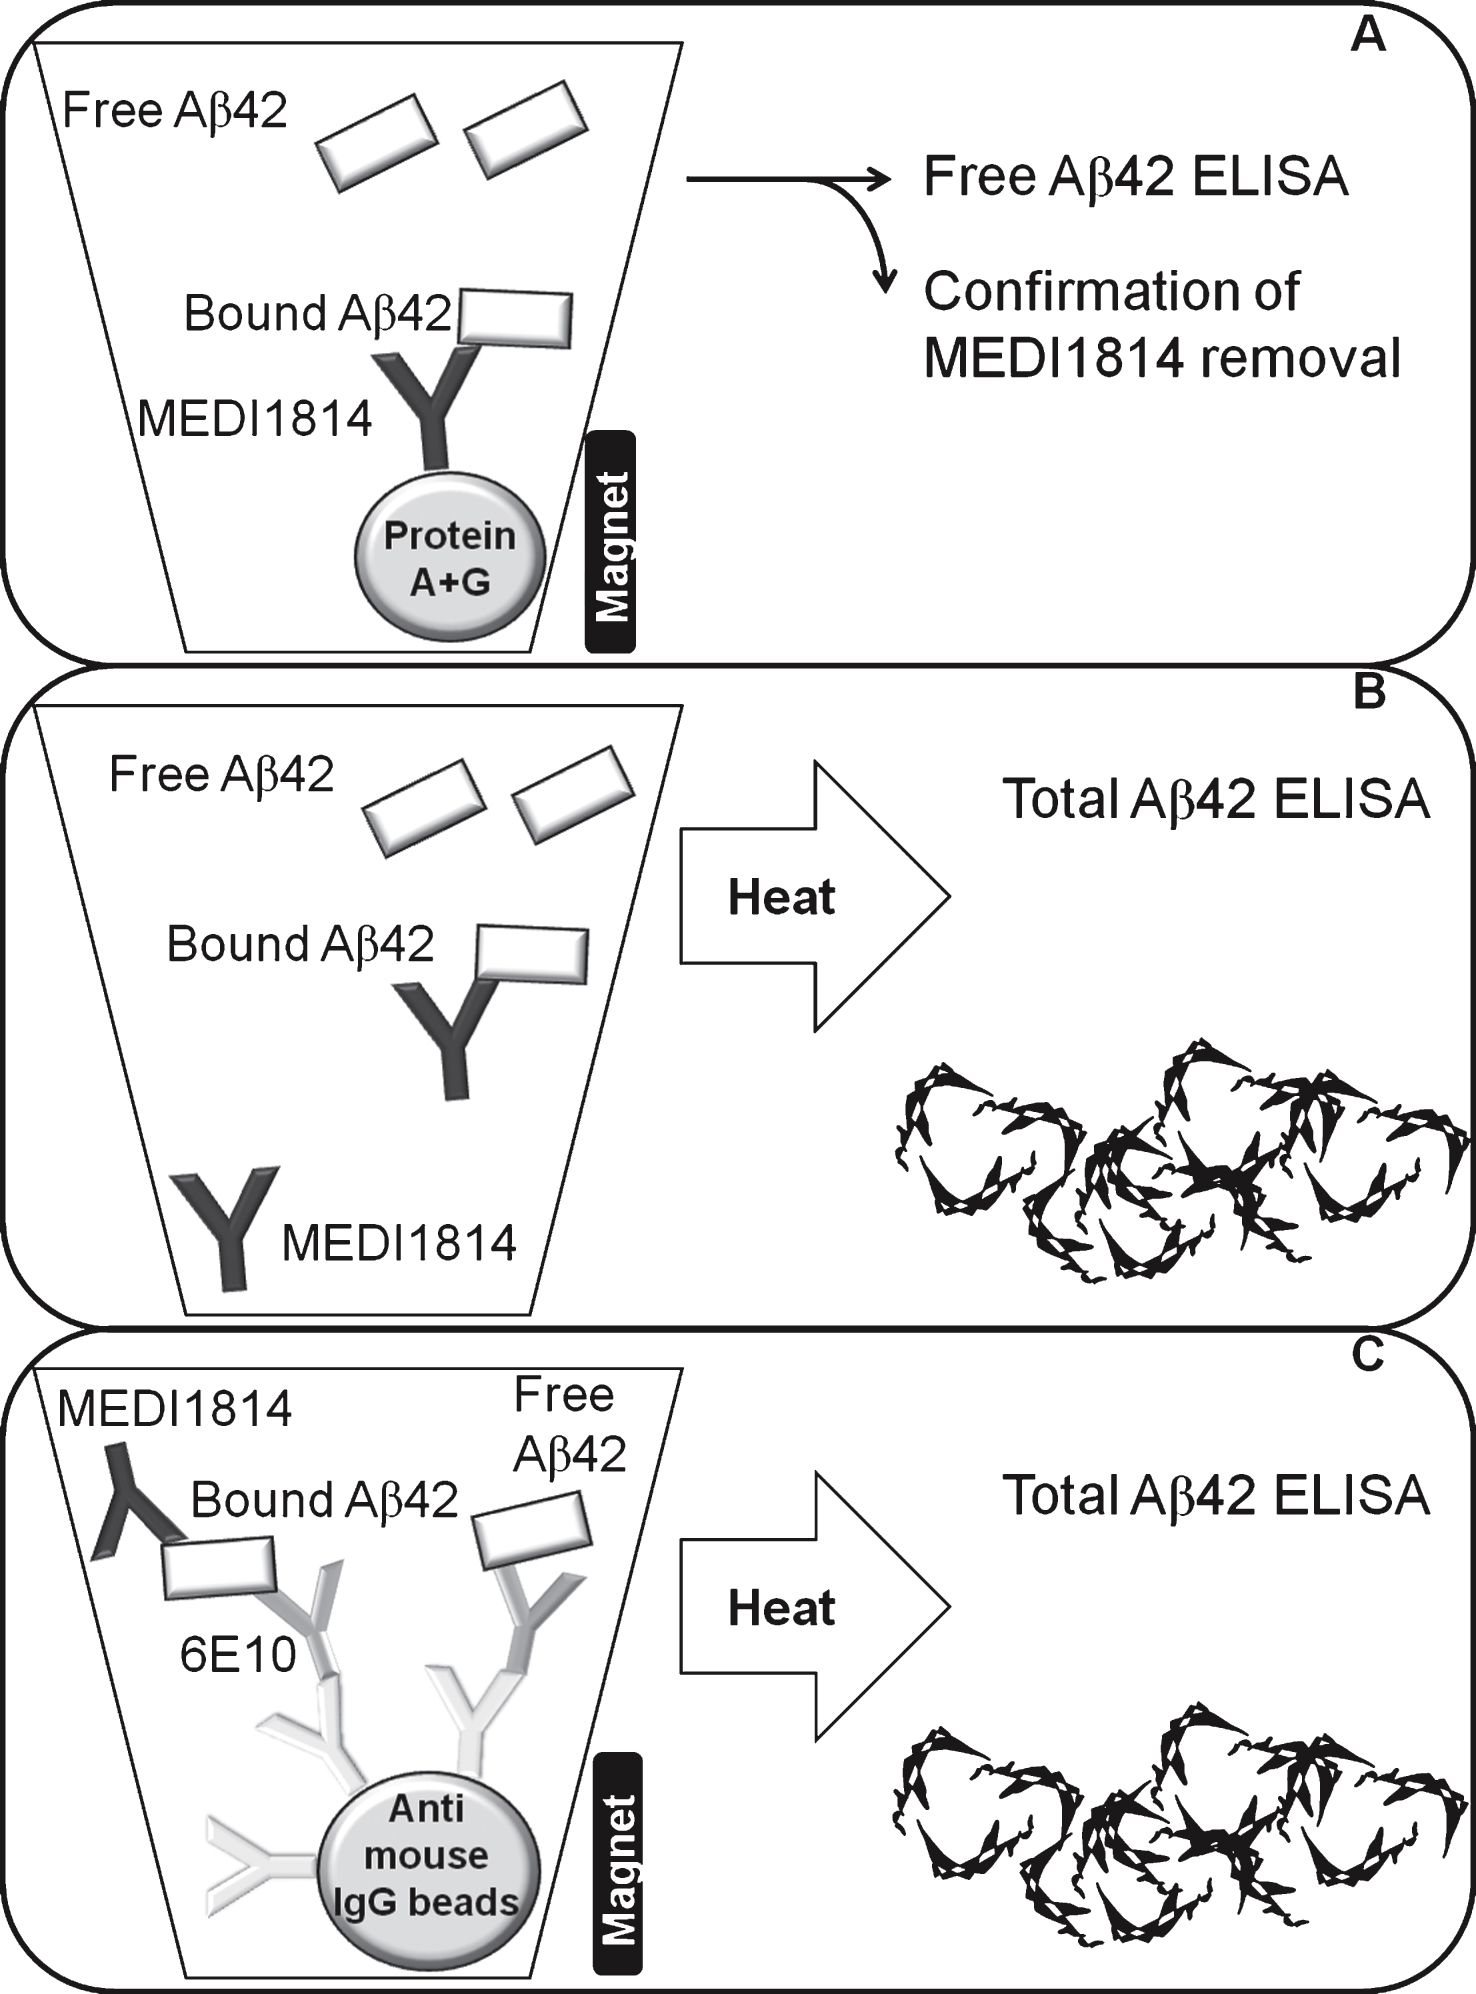 A schematic illustration of the assay set up to measure free Aβ42 in CSF (A), total Aβ42 in CSF (B), and total Aβ42 in plasma (C).